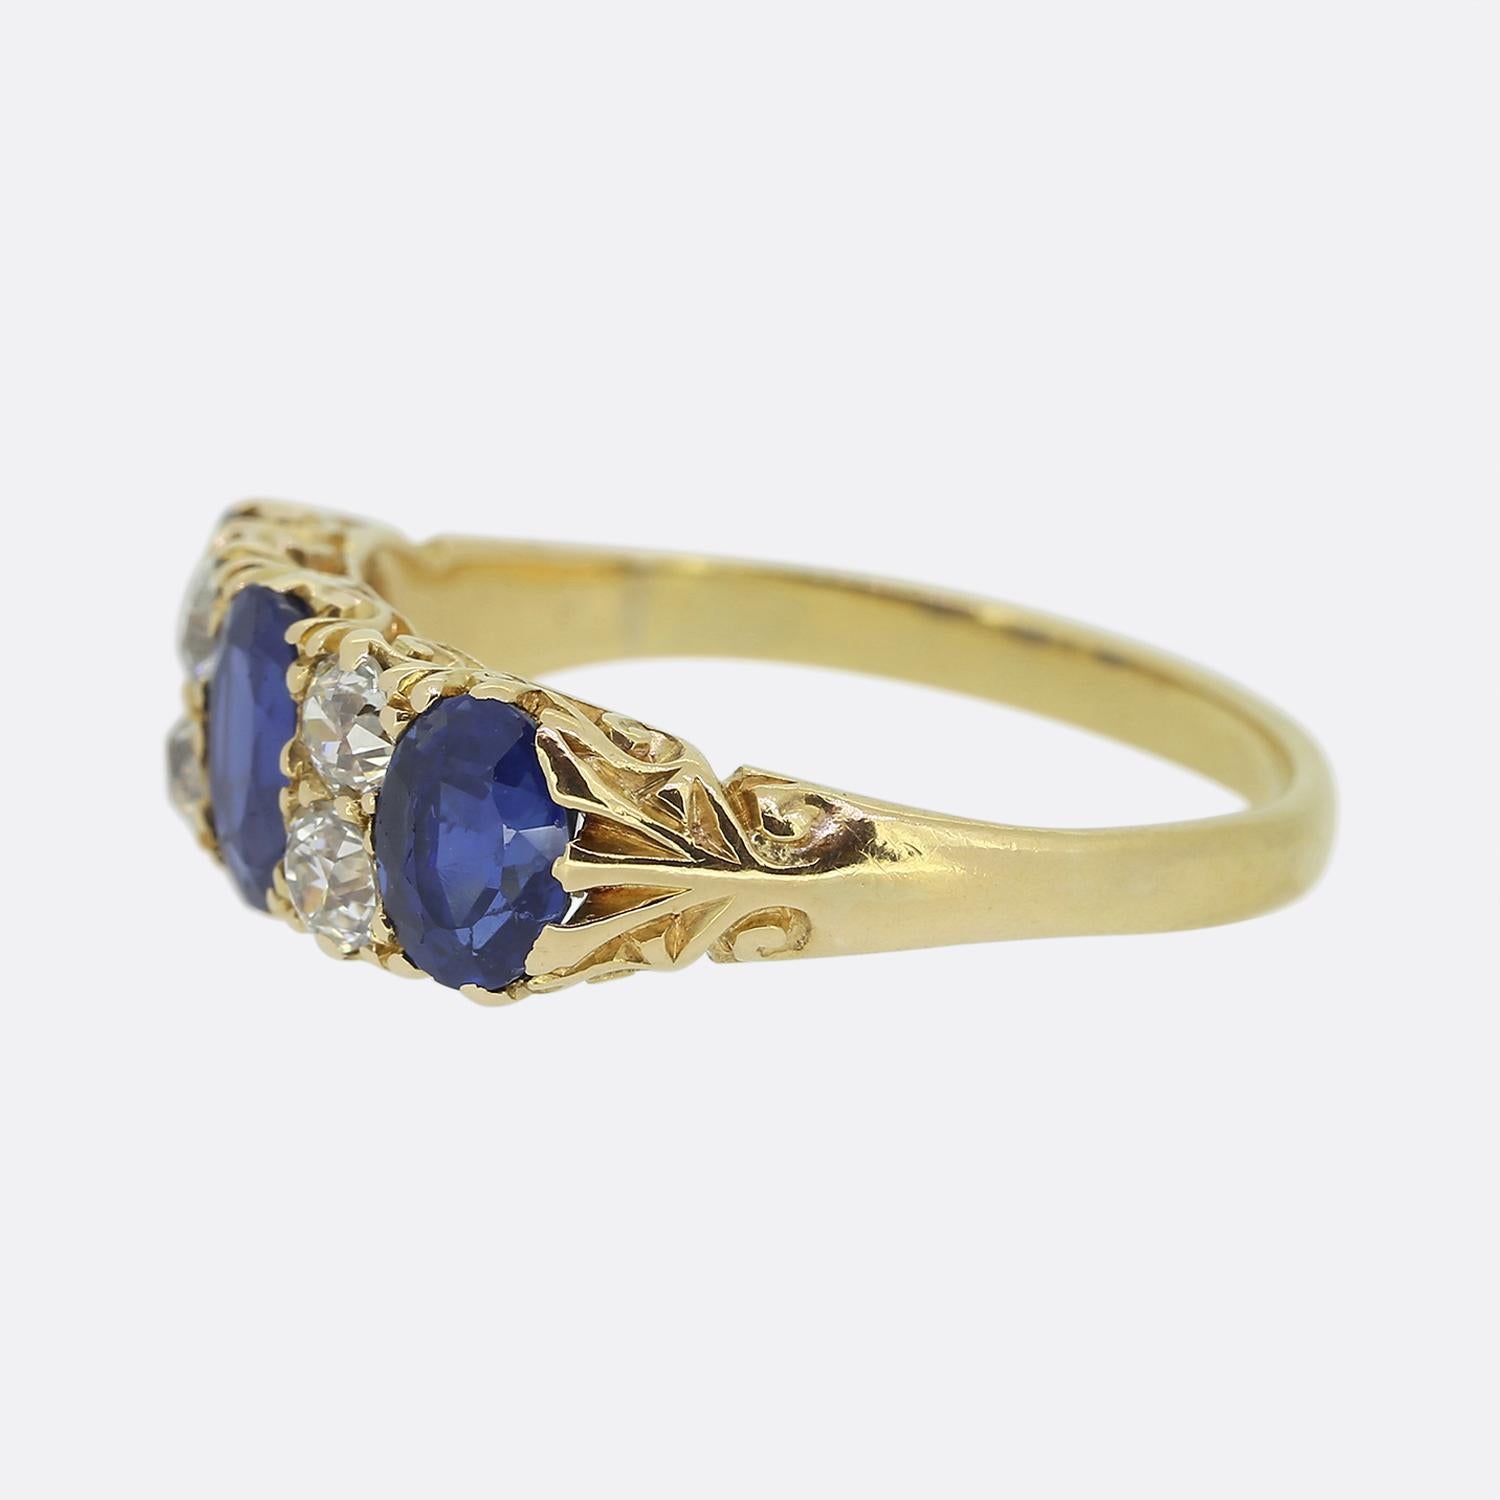 Here we have a beautiful sapphire and diamond ring that dates back to the Edwardian era. The ring has been crafted in 18ct yellow gold and features three sapphires that are separated by four bright white old cut diamonds. The unheated sapphires are